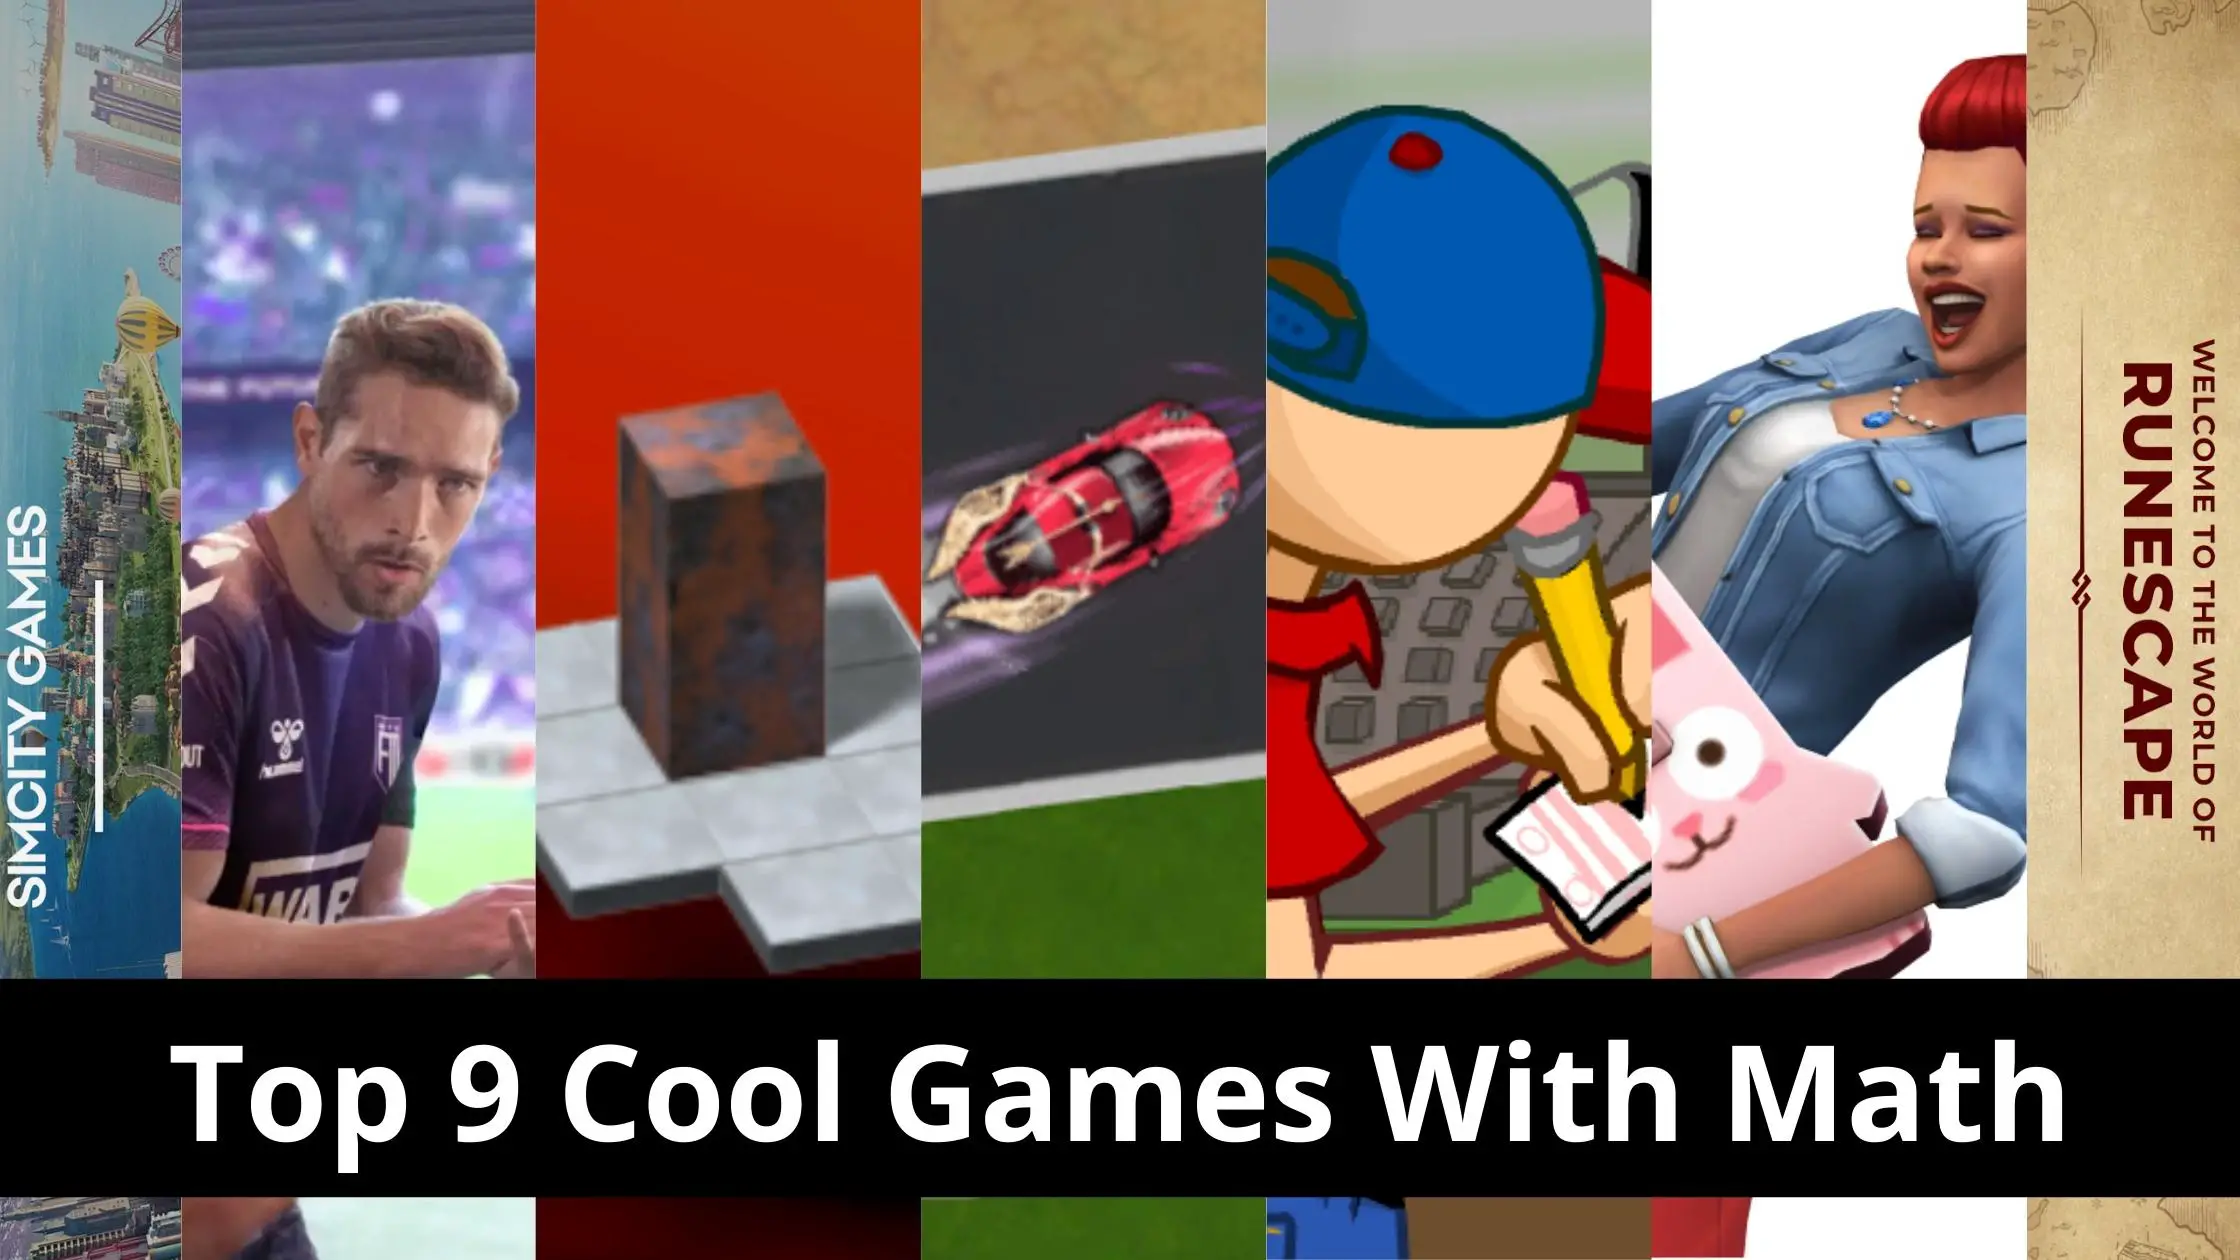 Top 9 Cool Games With Math - Maker's Aid